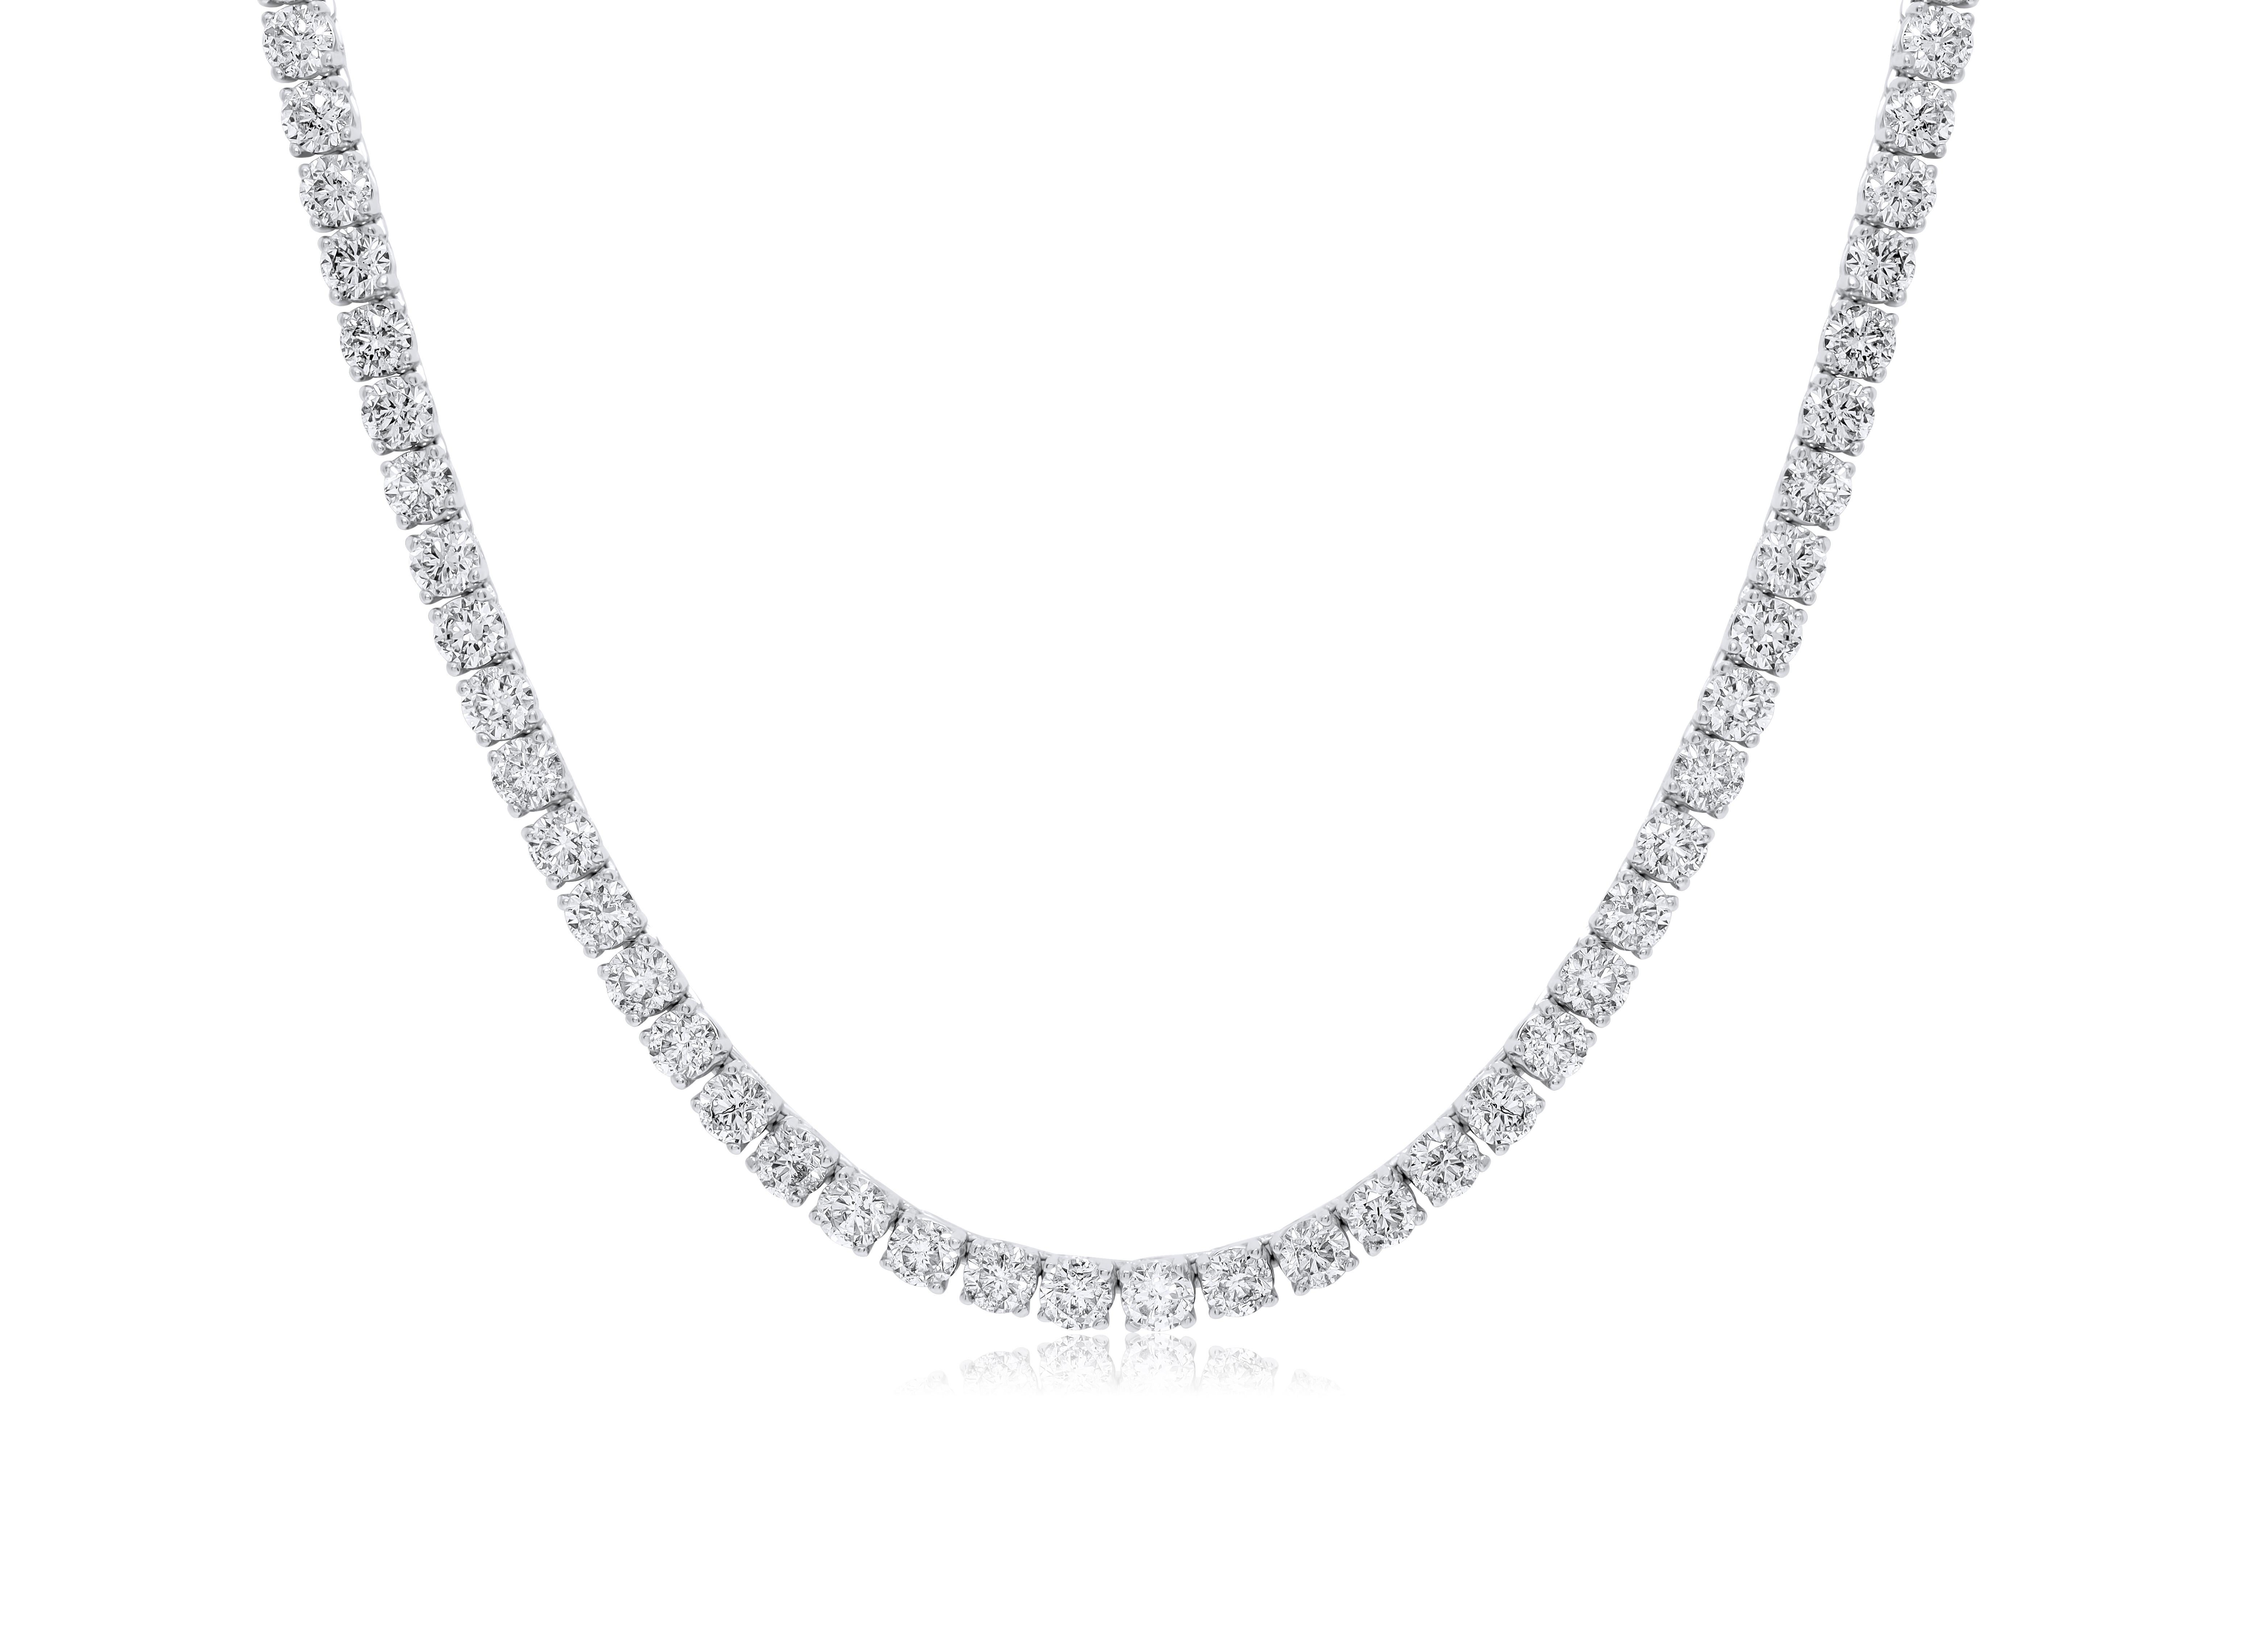 Brilliant Cut Diana M. Custom 28.25 cts 4 Prong Diamond  Tennis Necklace 18k White Gold For Sale